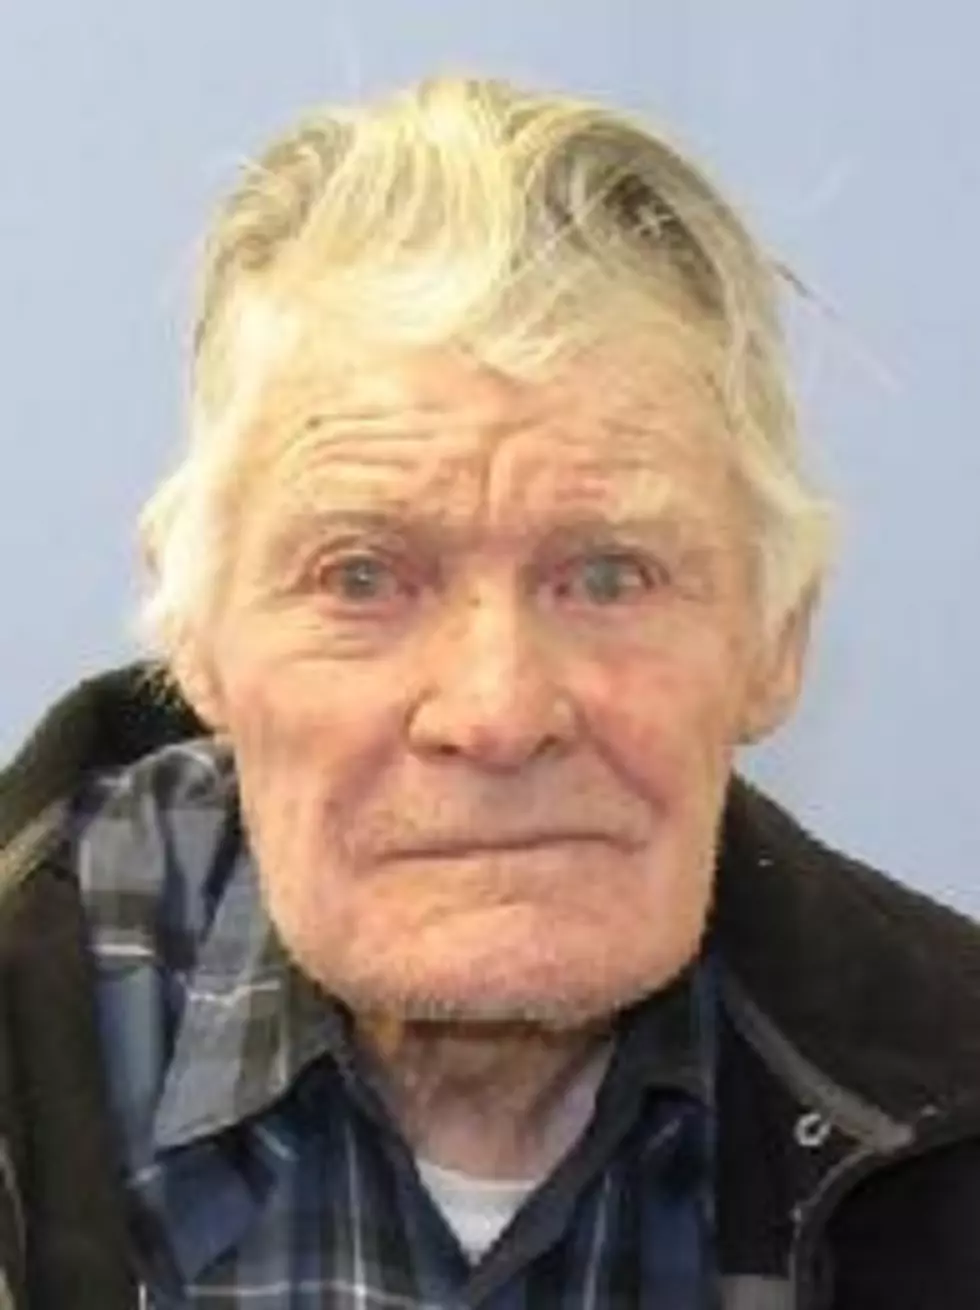 CANCELLED: Missing Person Alert for 88 YO Butte Man